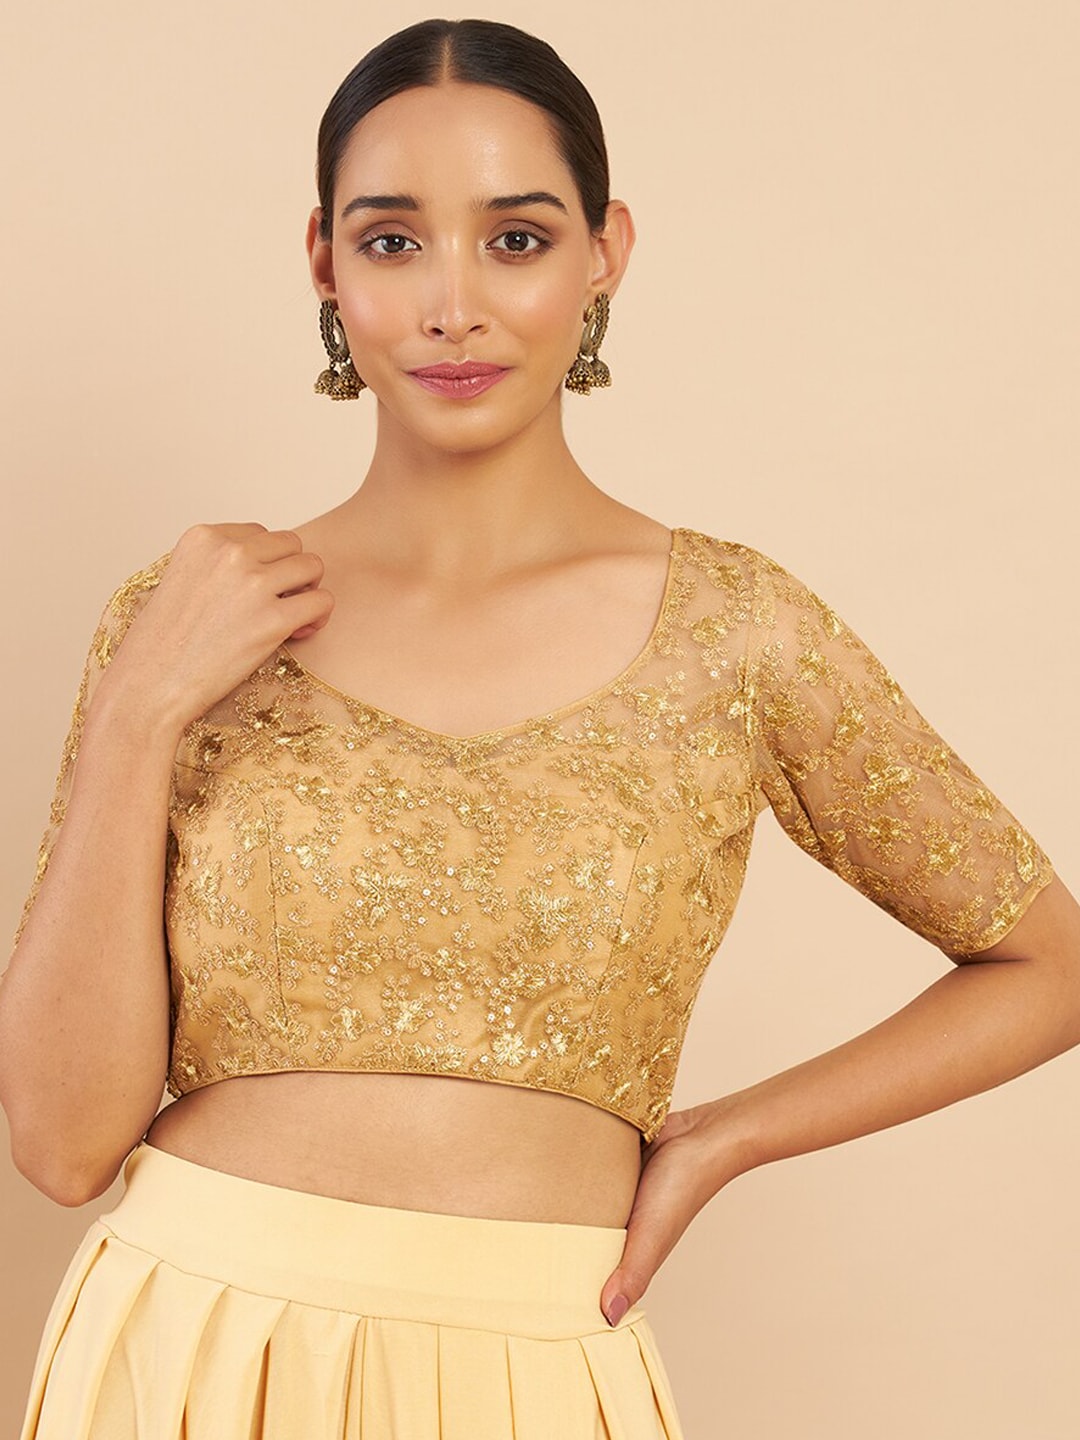 Soch Golden Floral Embroidery And Sequins Net Saree Blouse Price in India